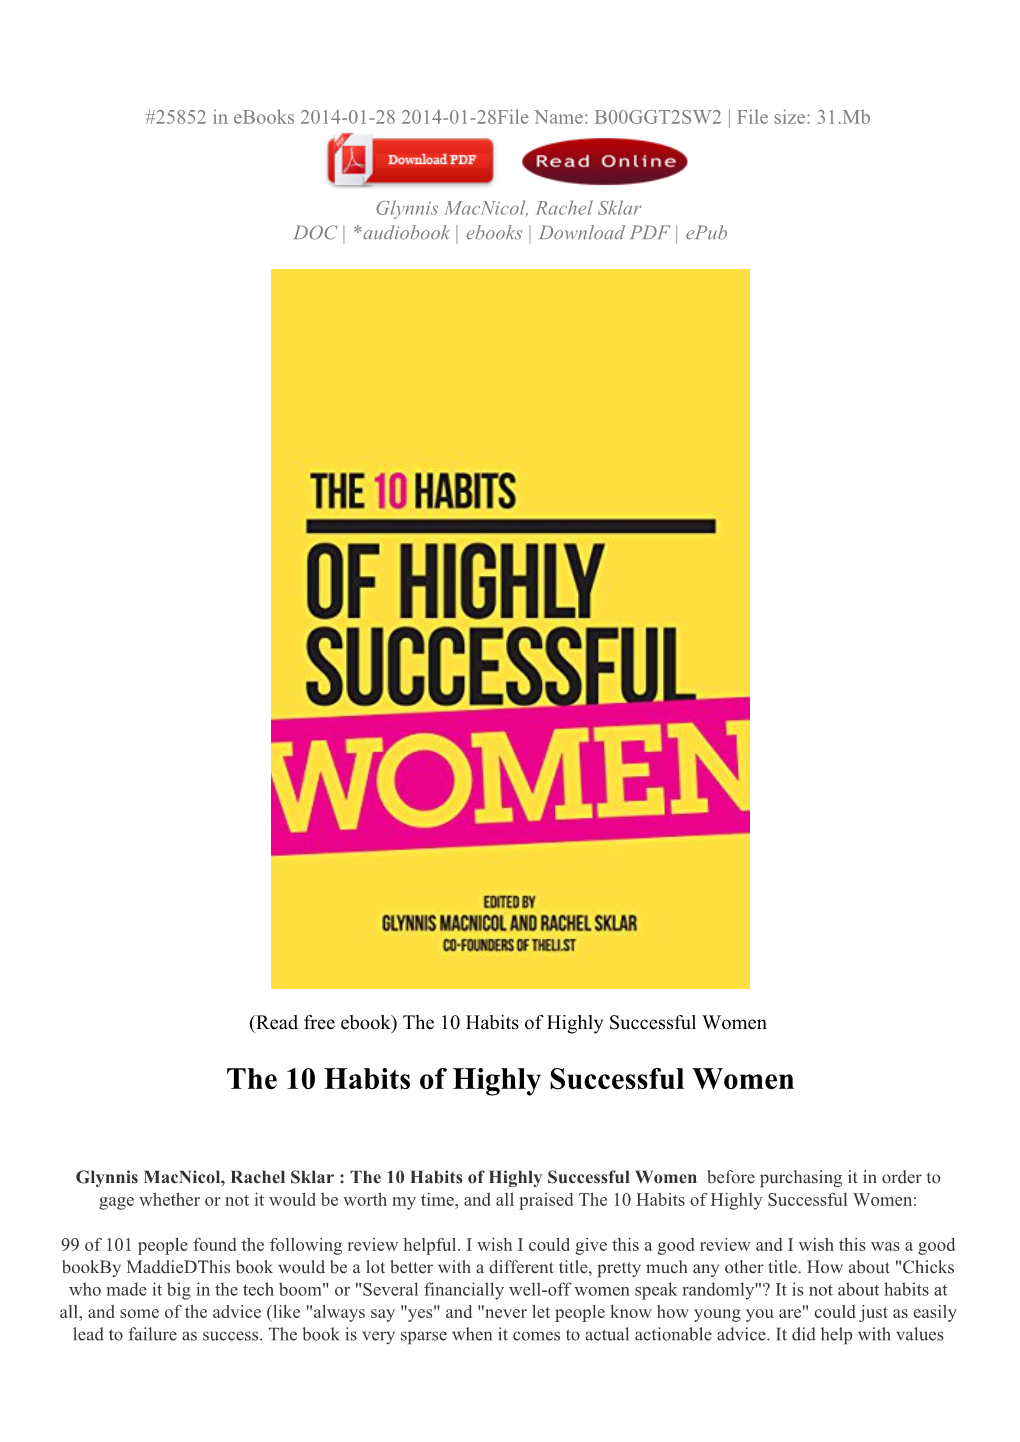 The 10 Habits of Highly Successful Women